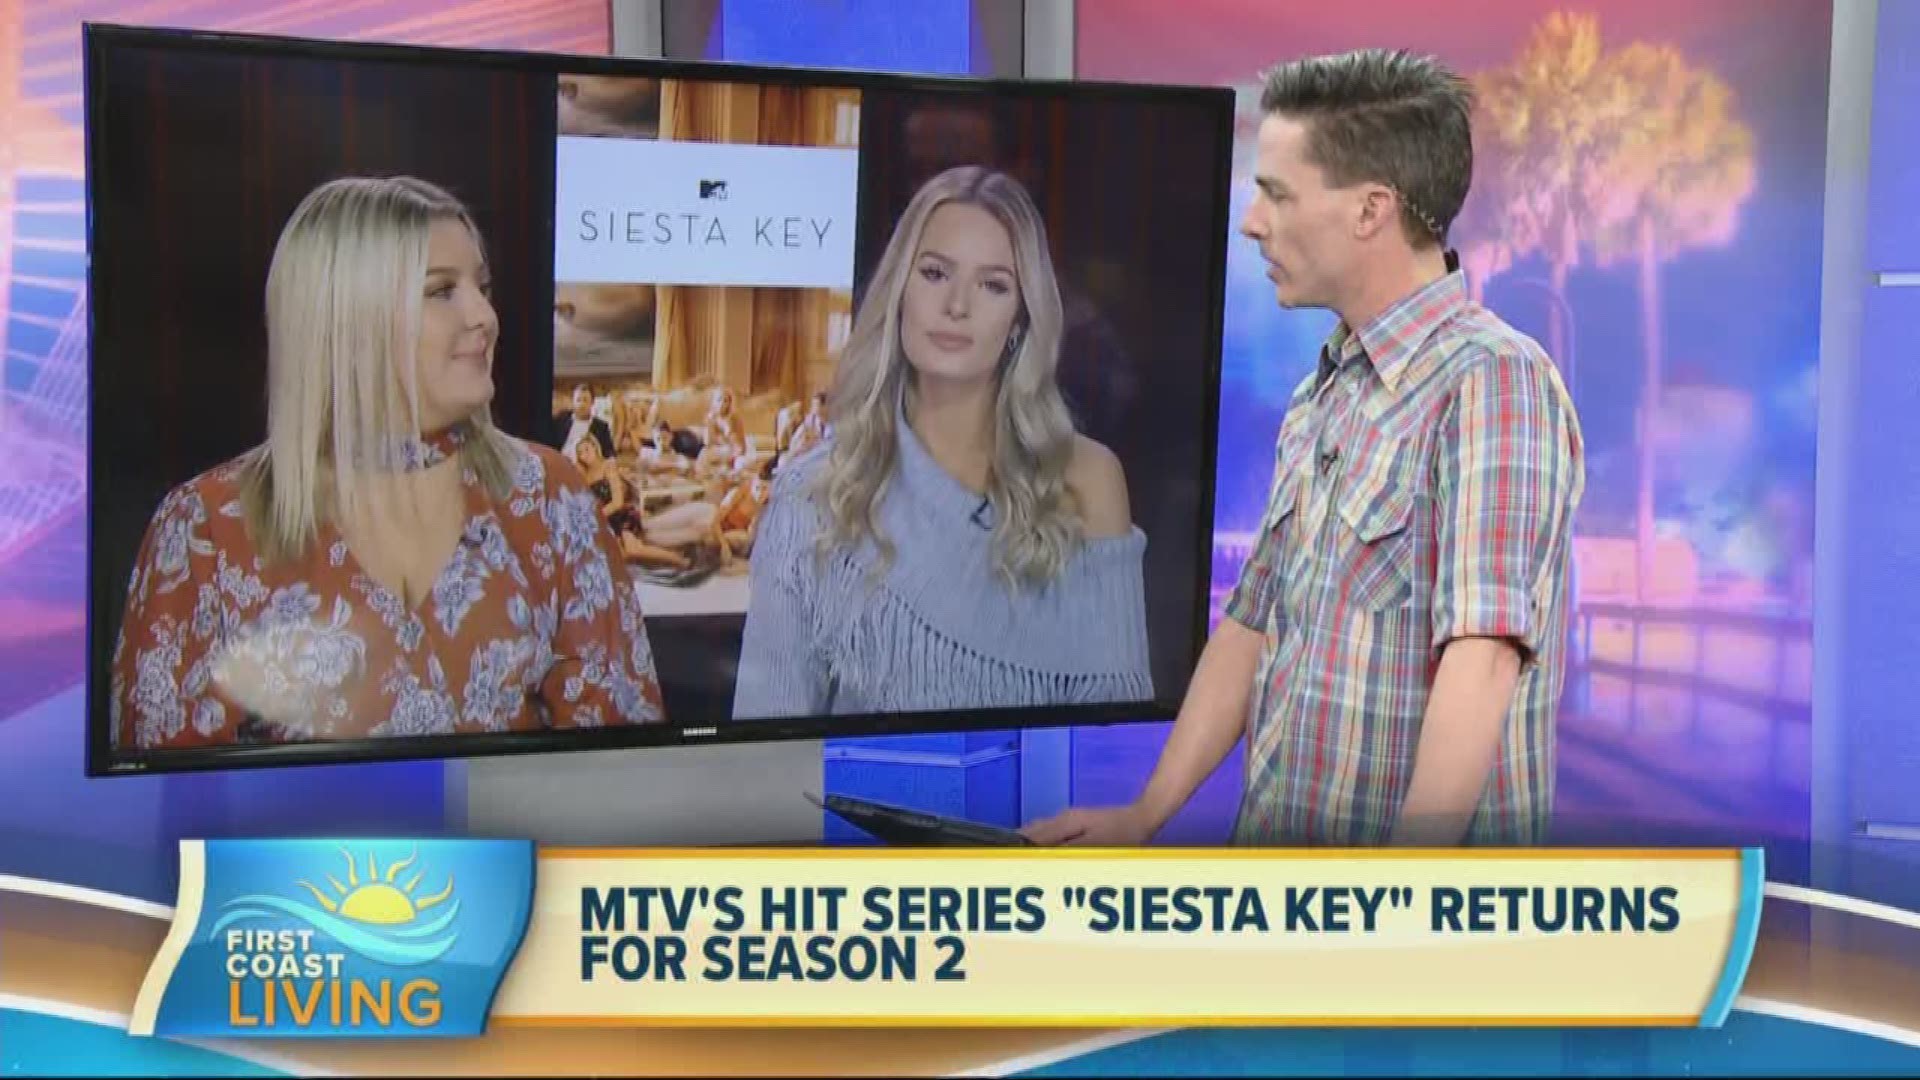 Things are heating up in Siesta Key! Don't miss the season premiere!